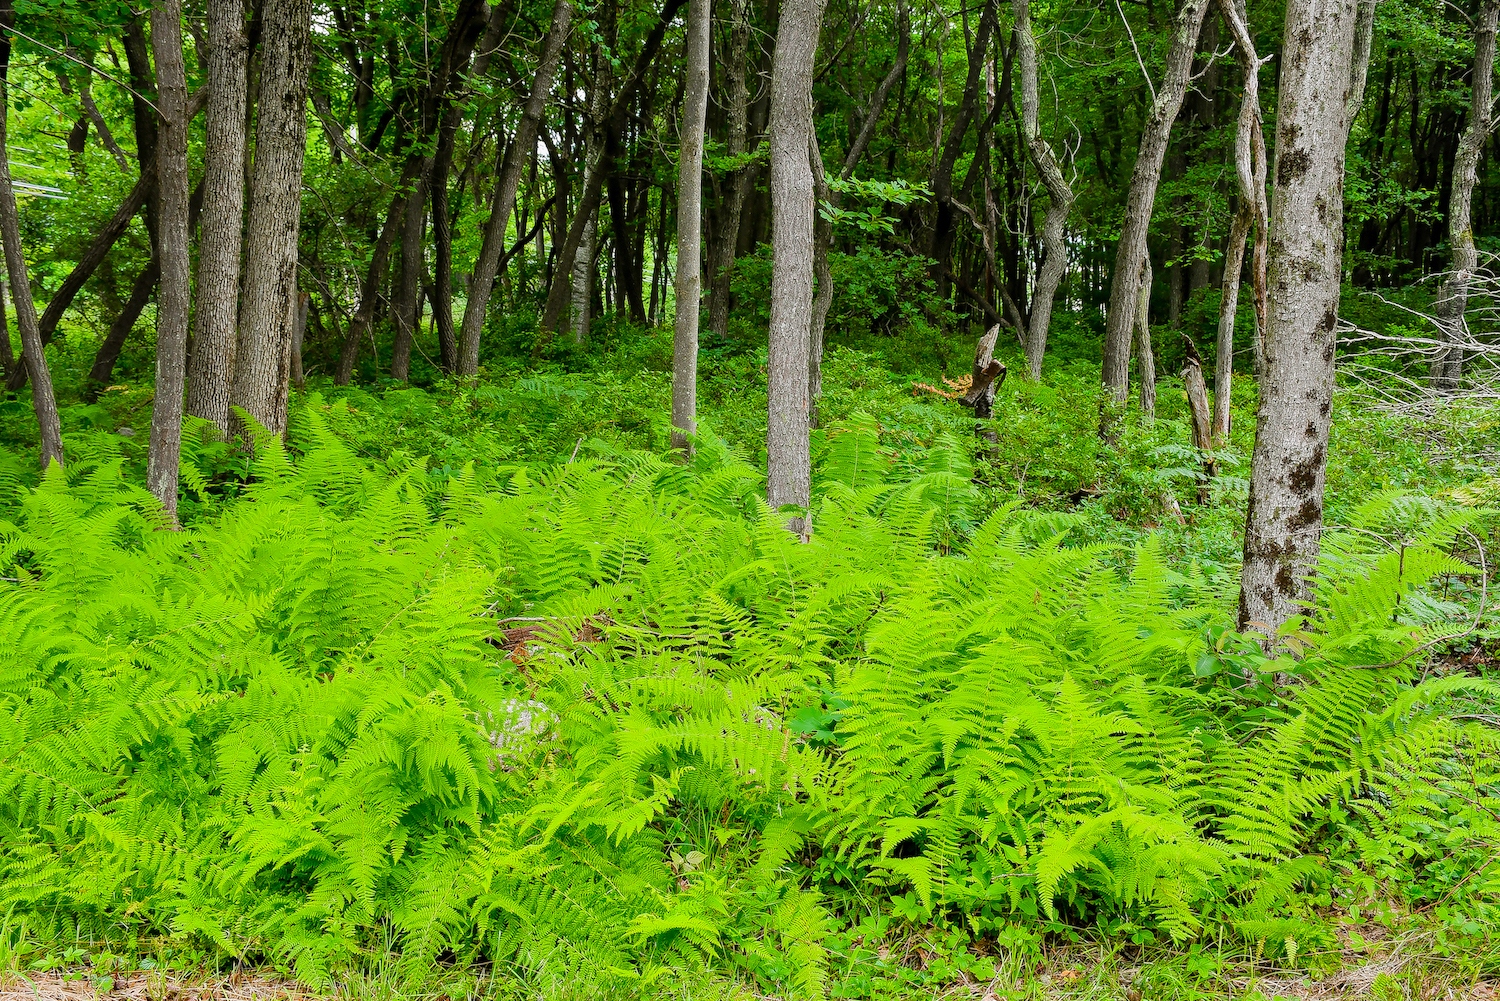 Bright green ferns grow on a forest floor.